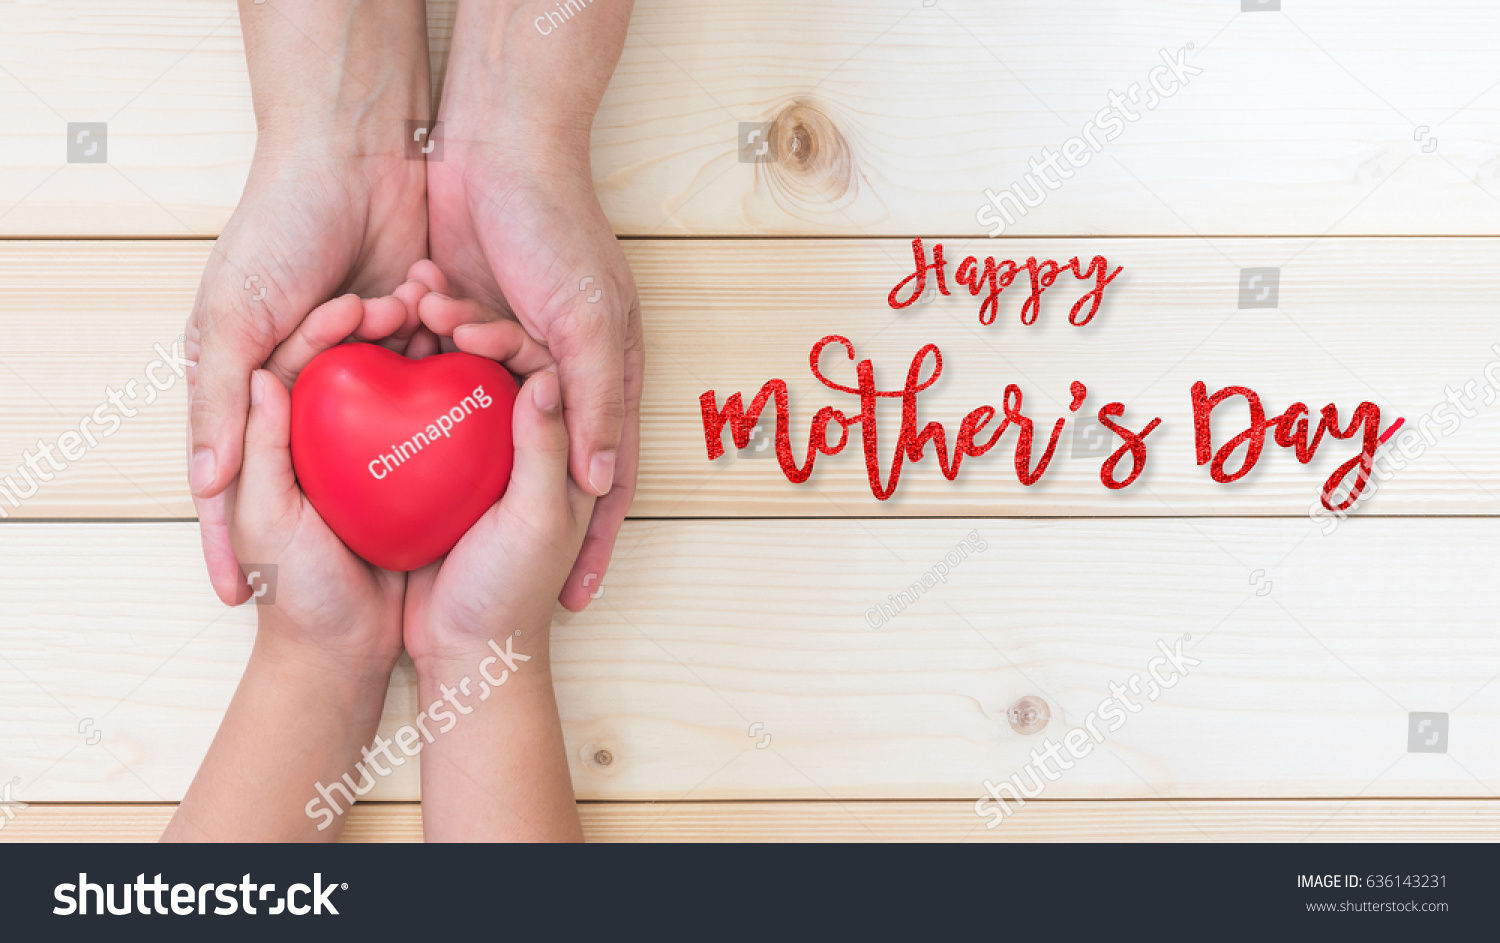 Happy Mother's day and love you Mom holiday greeting card with  woman support kid's hands giving red heart gift  #636143231